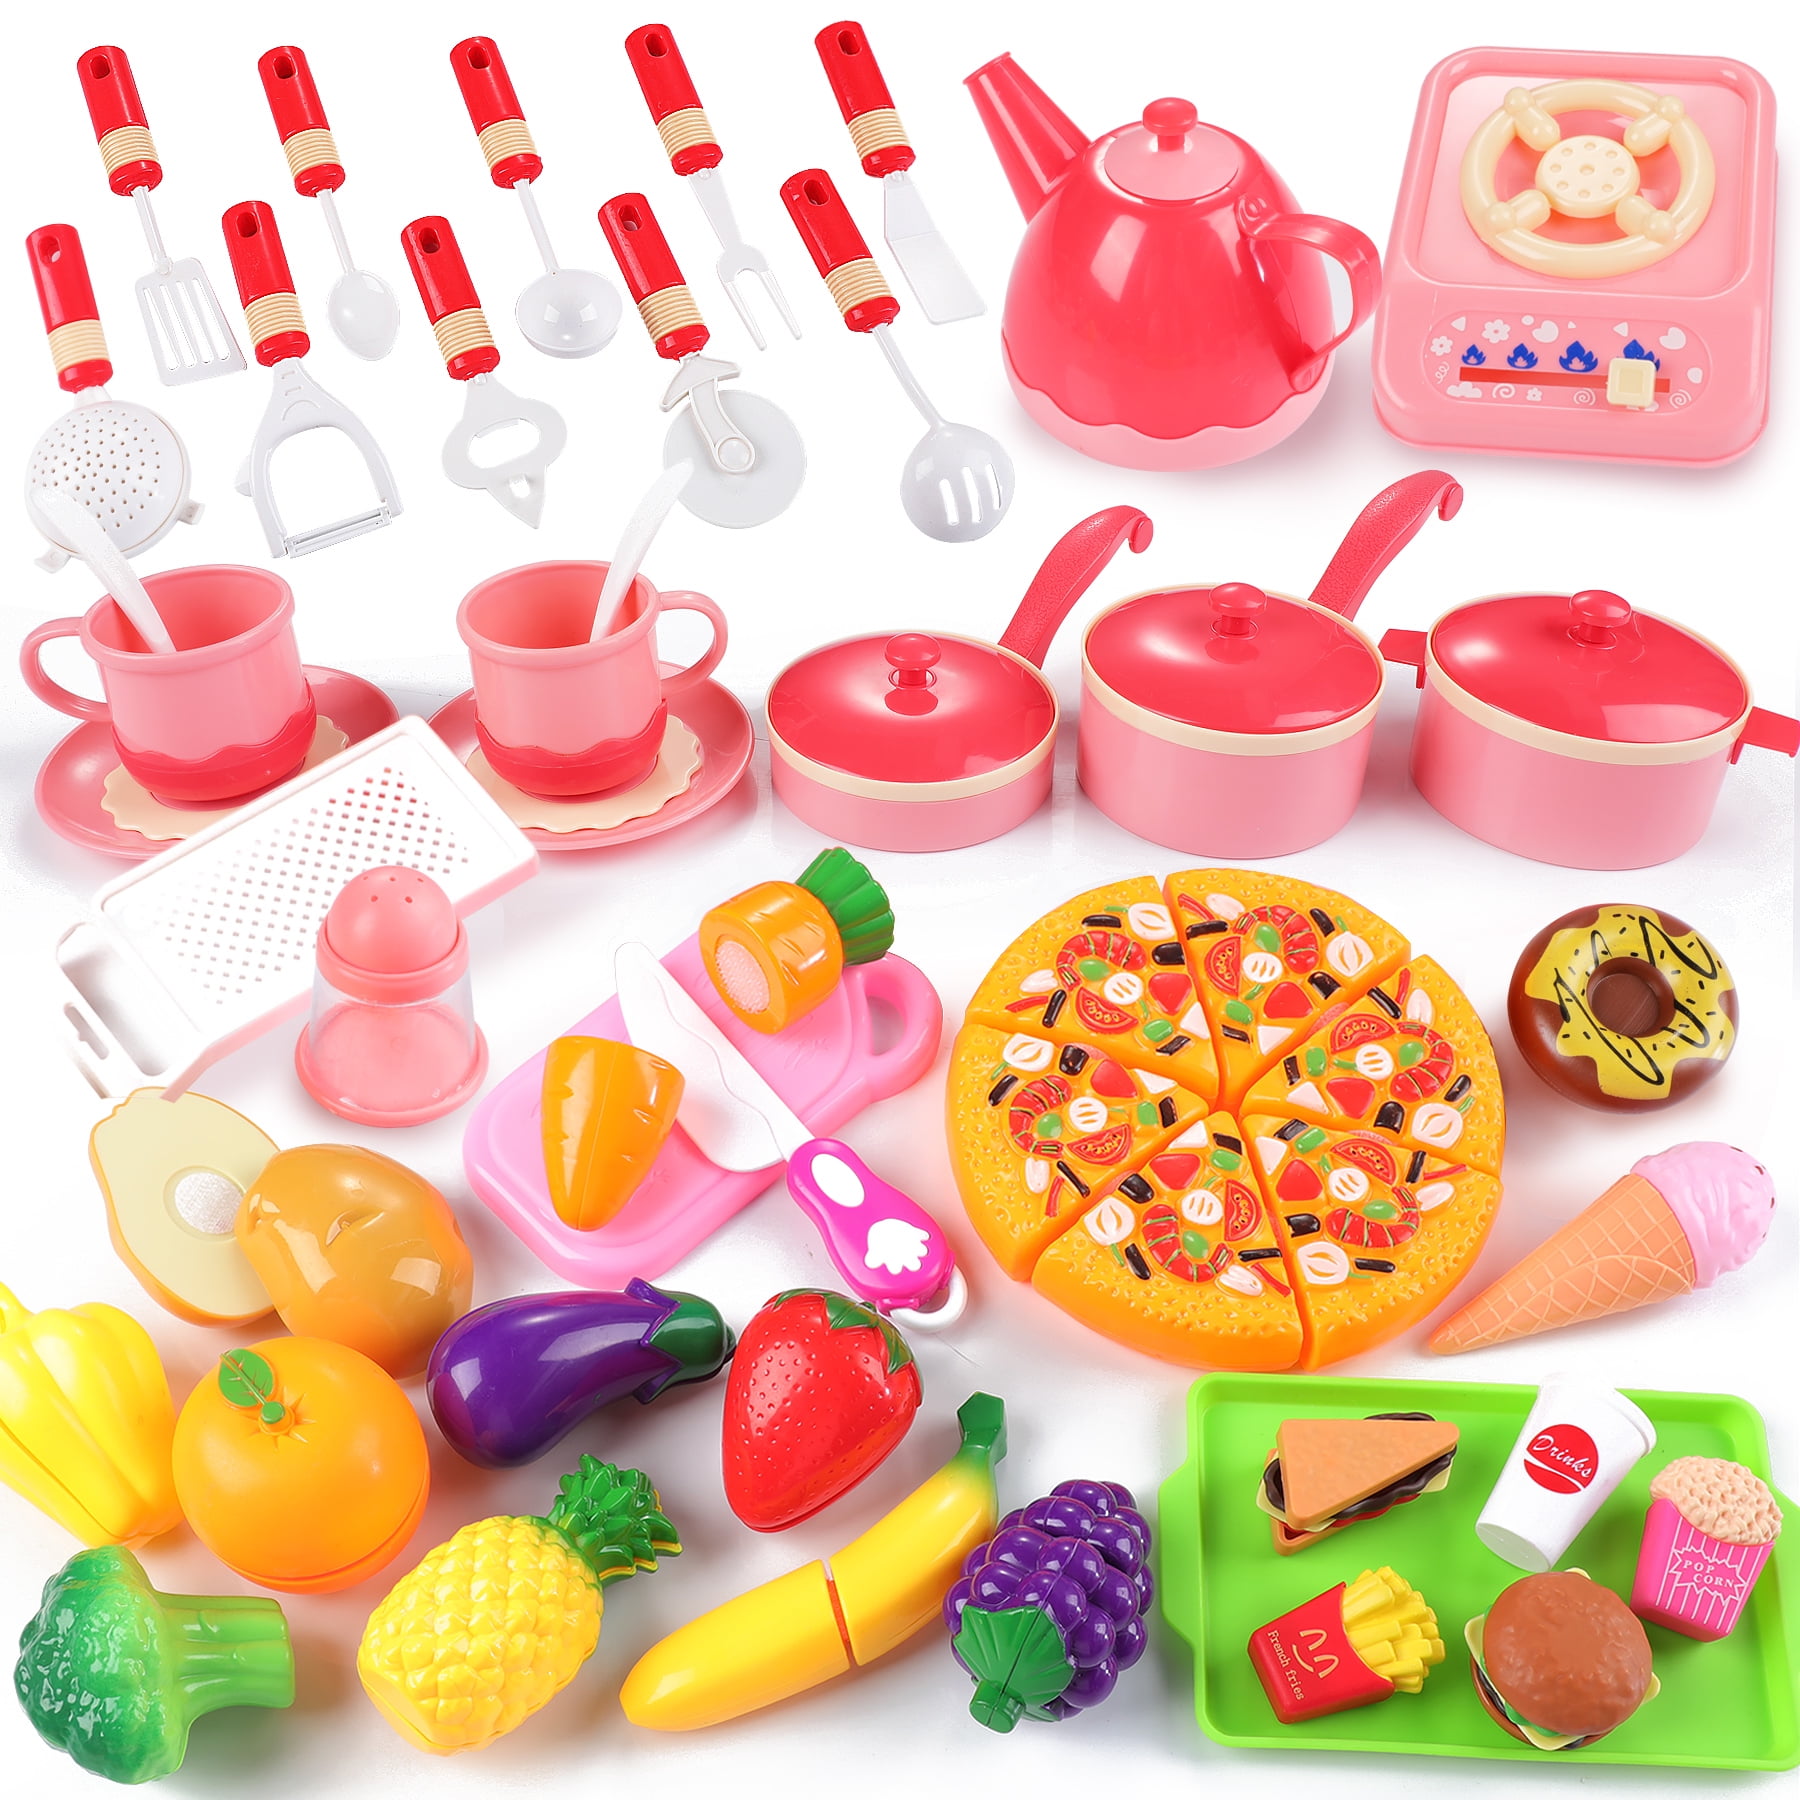 5pcs/set Baby Pretend Play Kitchen Toys Kid's Utensils Cooking Pots For Doll OC 